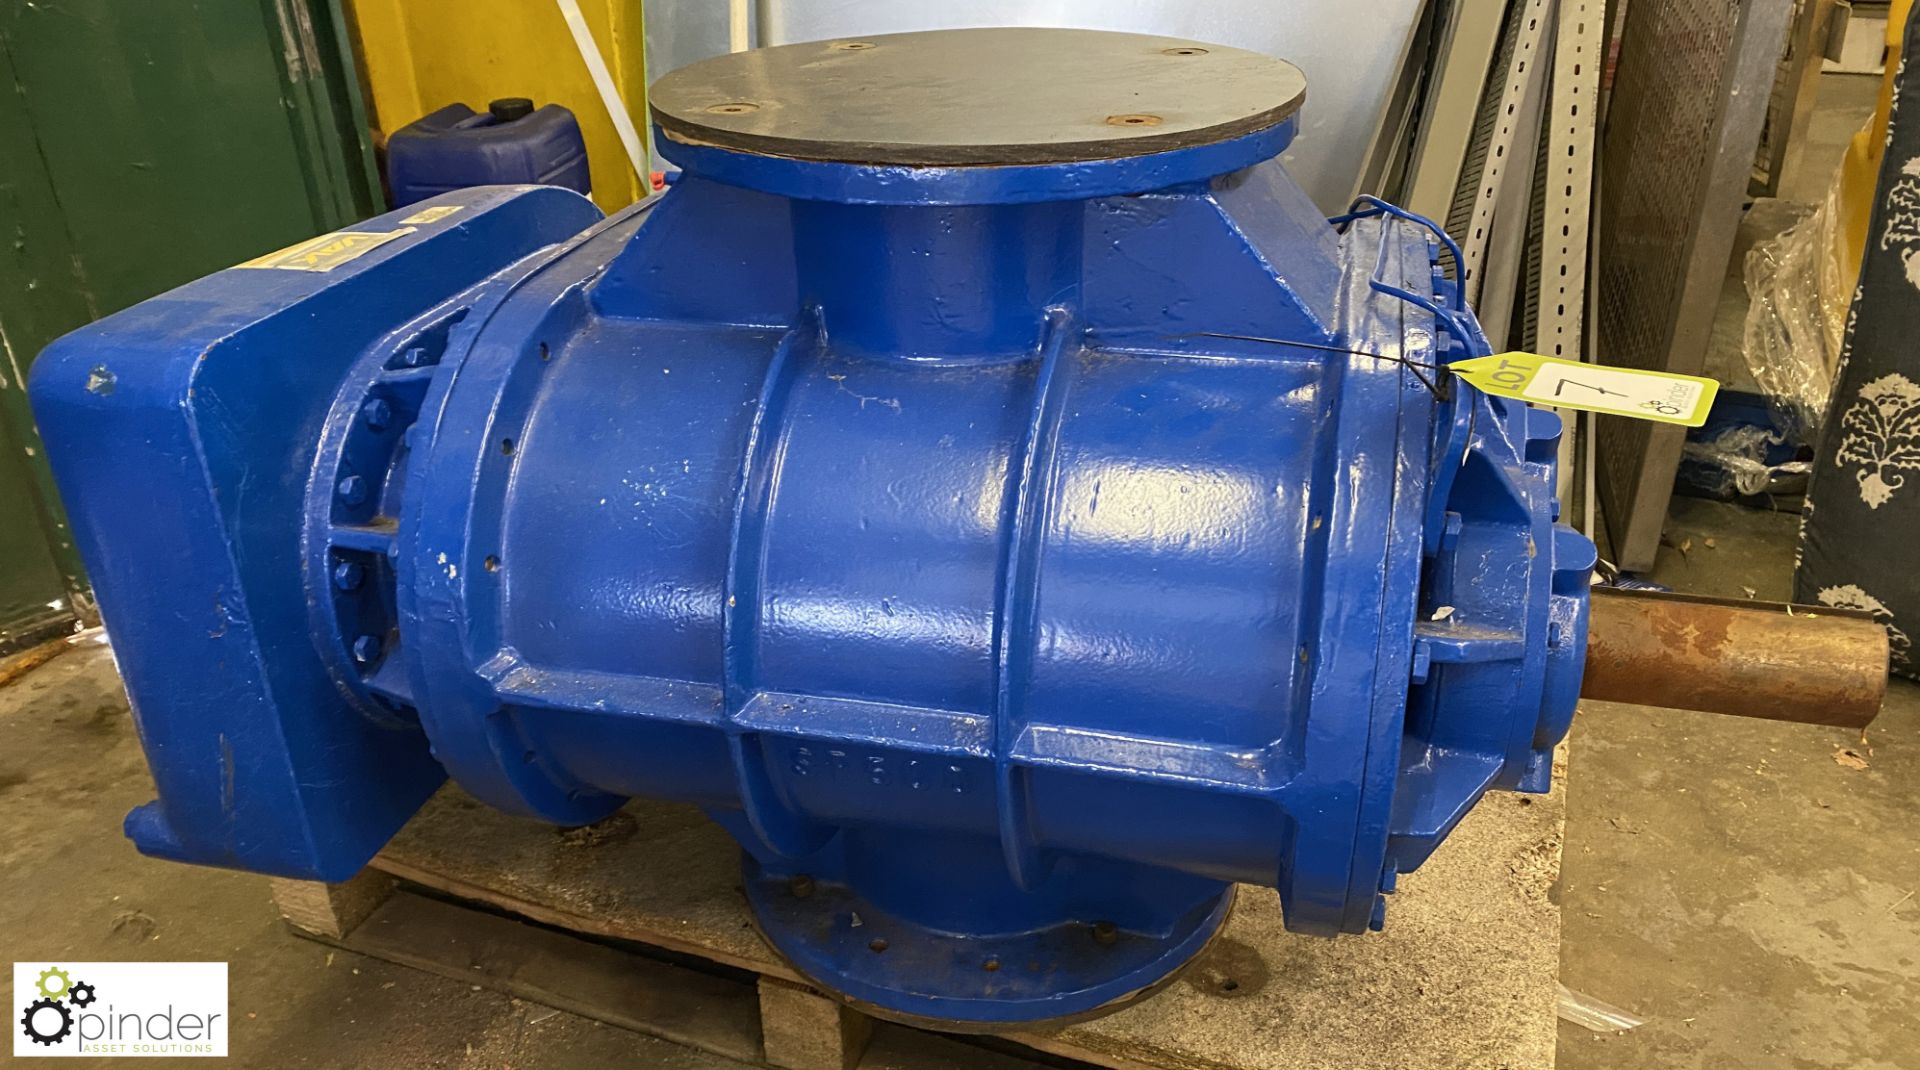 Adams Ricardo SR500 Blower, serial number A7726, refurbished (LOCATION: Corby) - Image 2 of 6